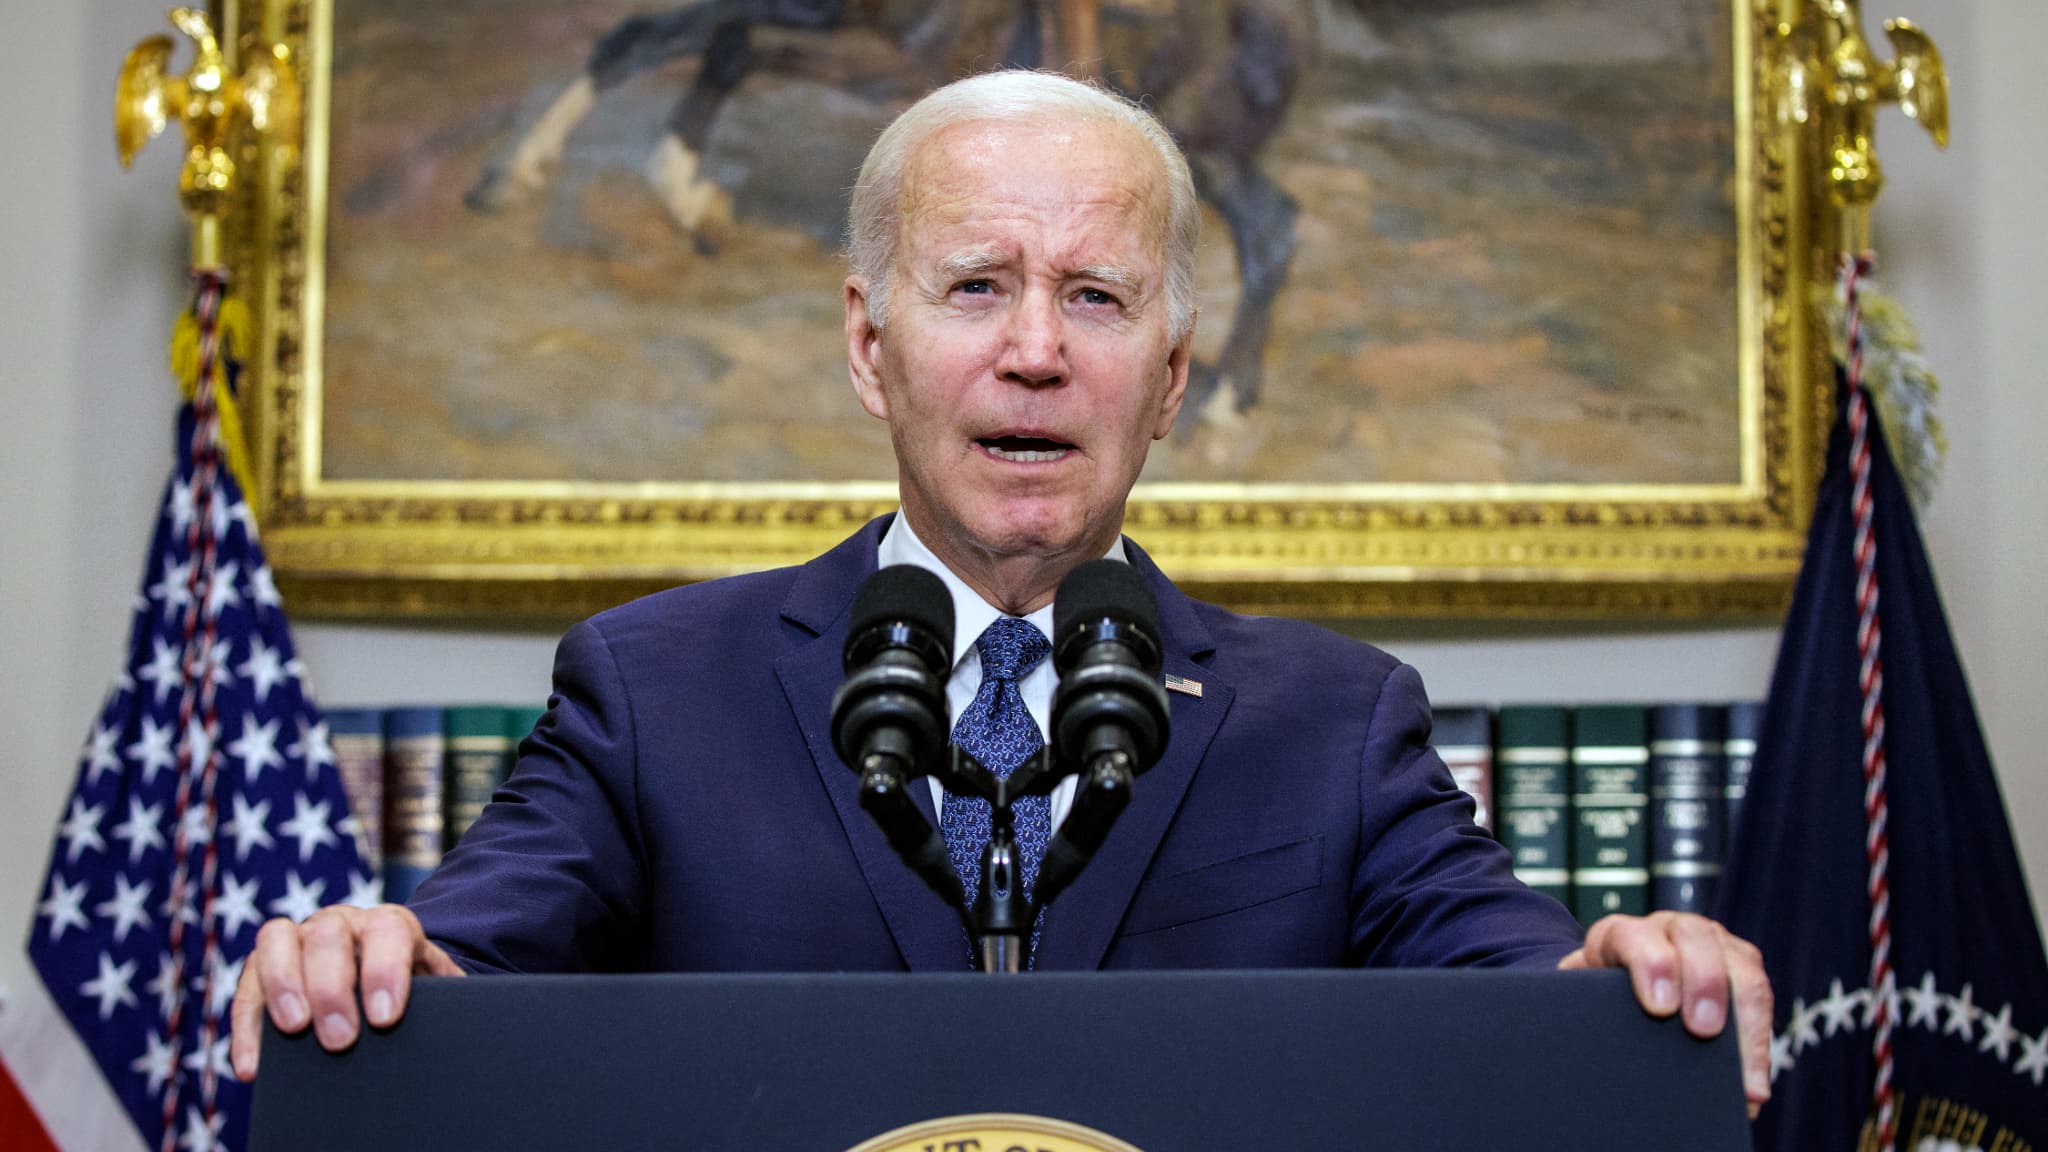 Biden defends his decision to run again in the face of criticism of his age